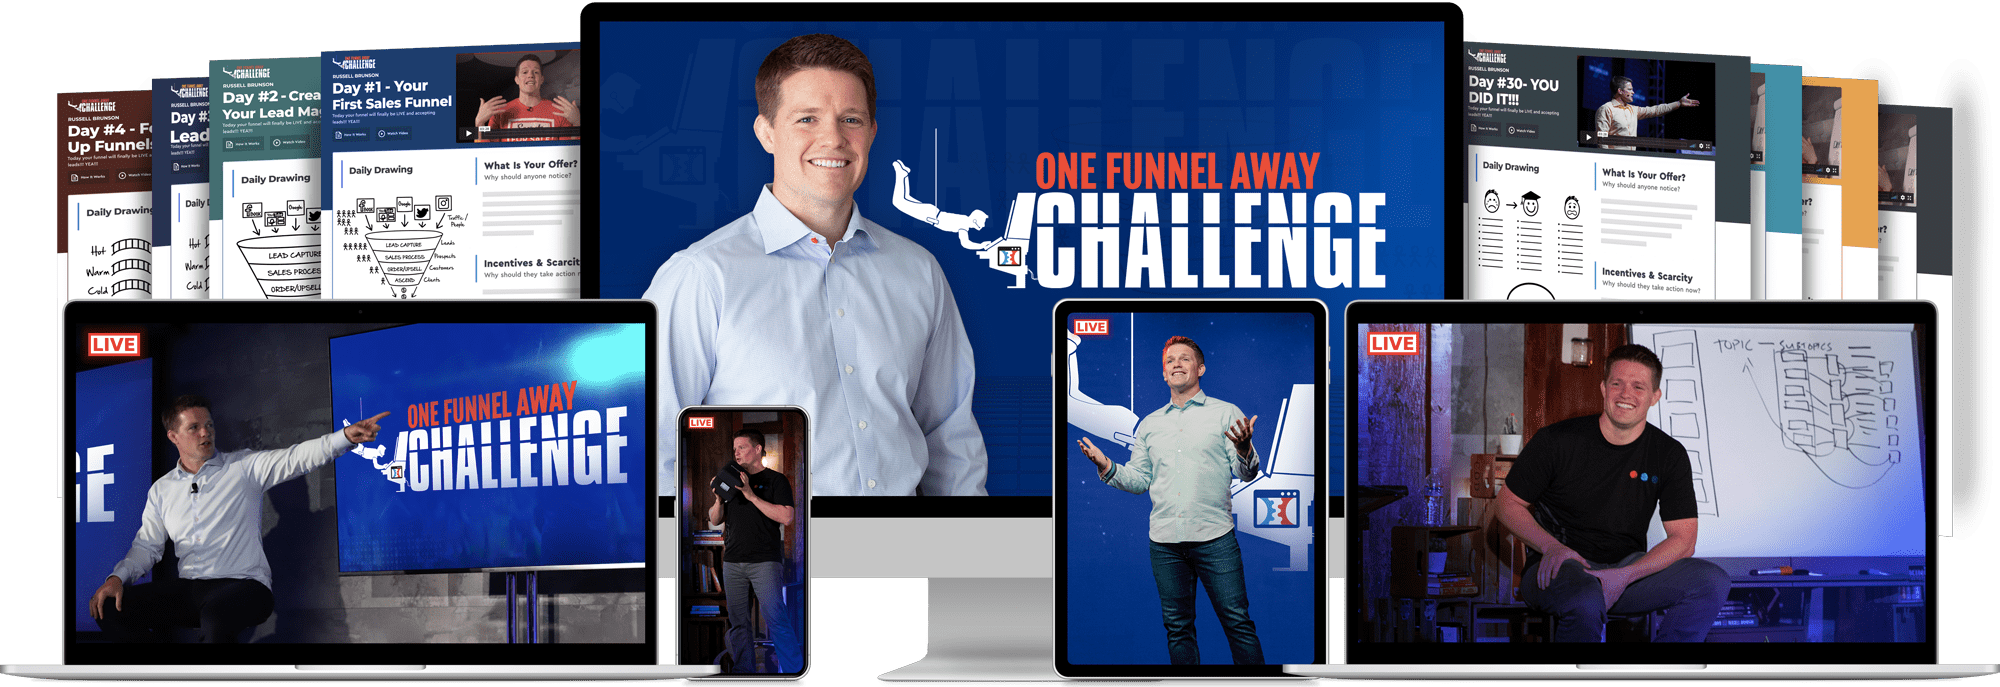 One Funnel Away Challange By Russell Brunson